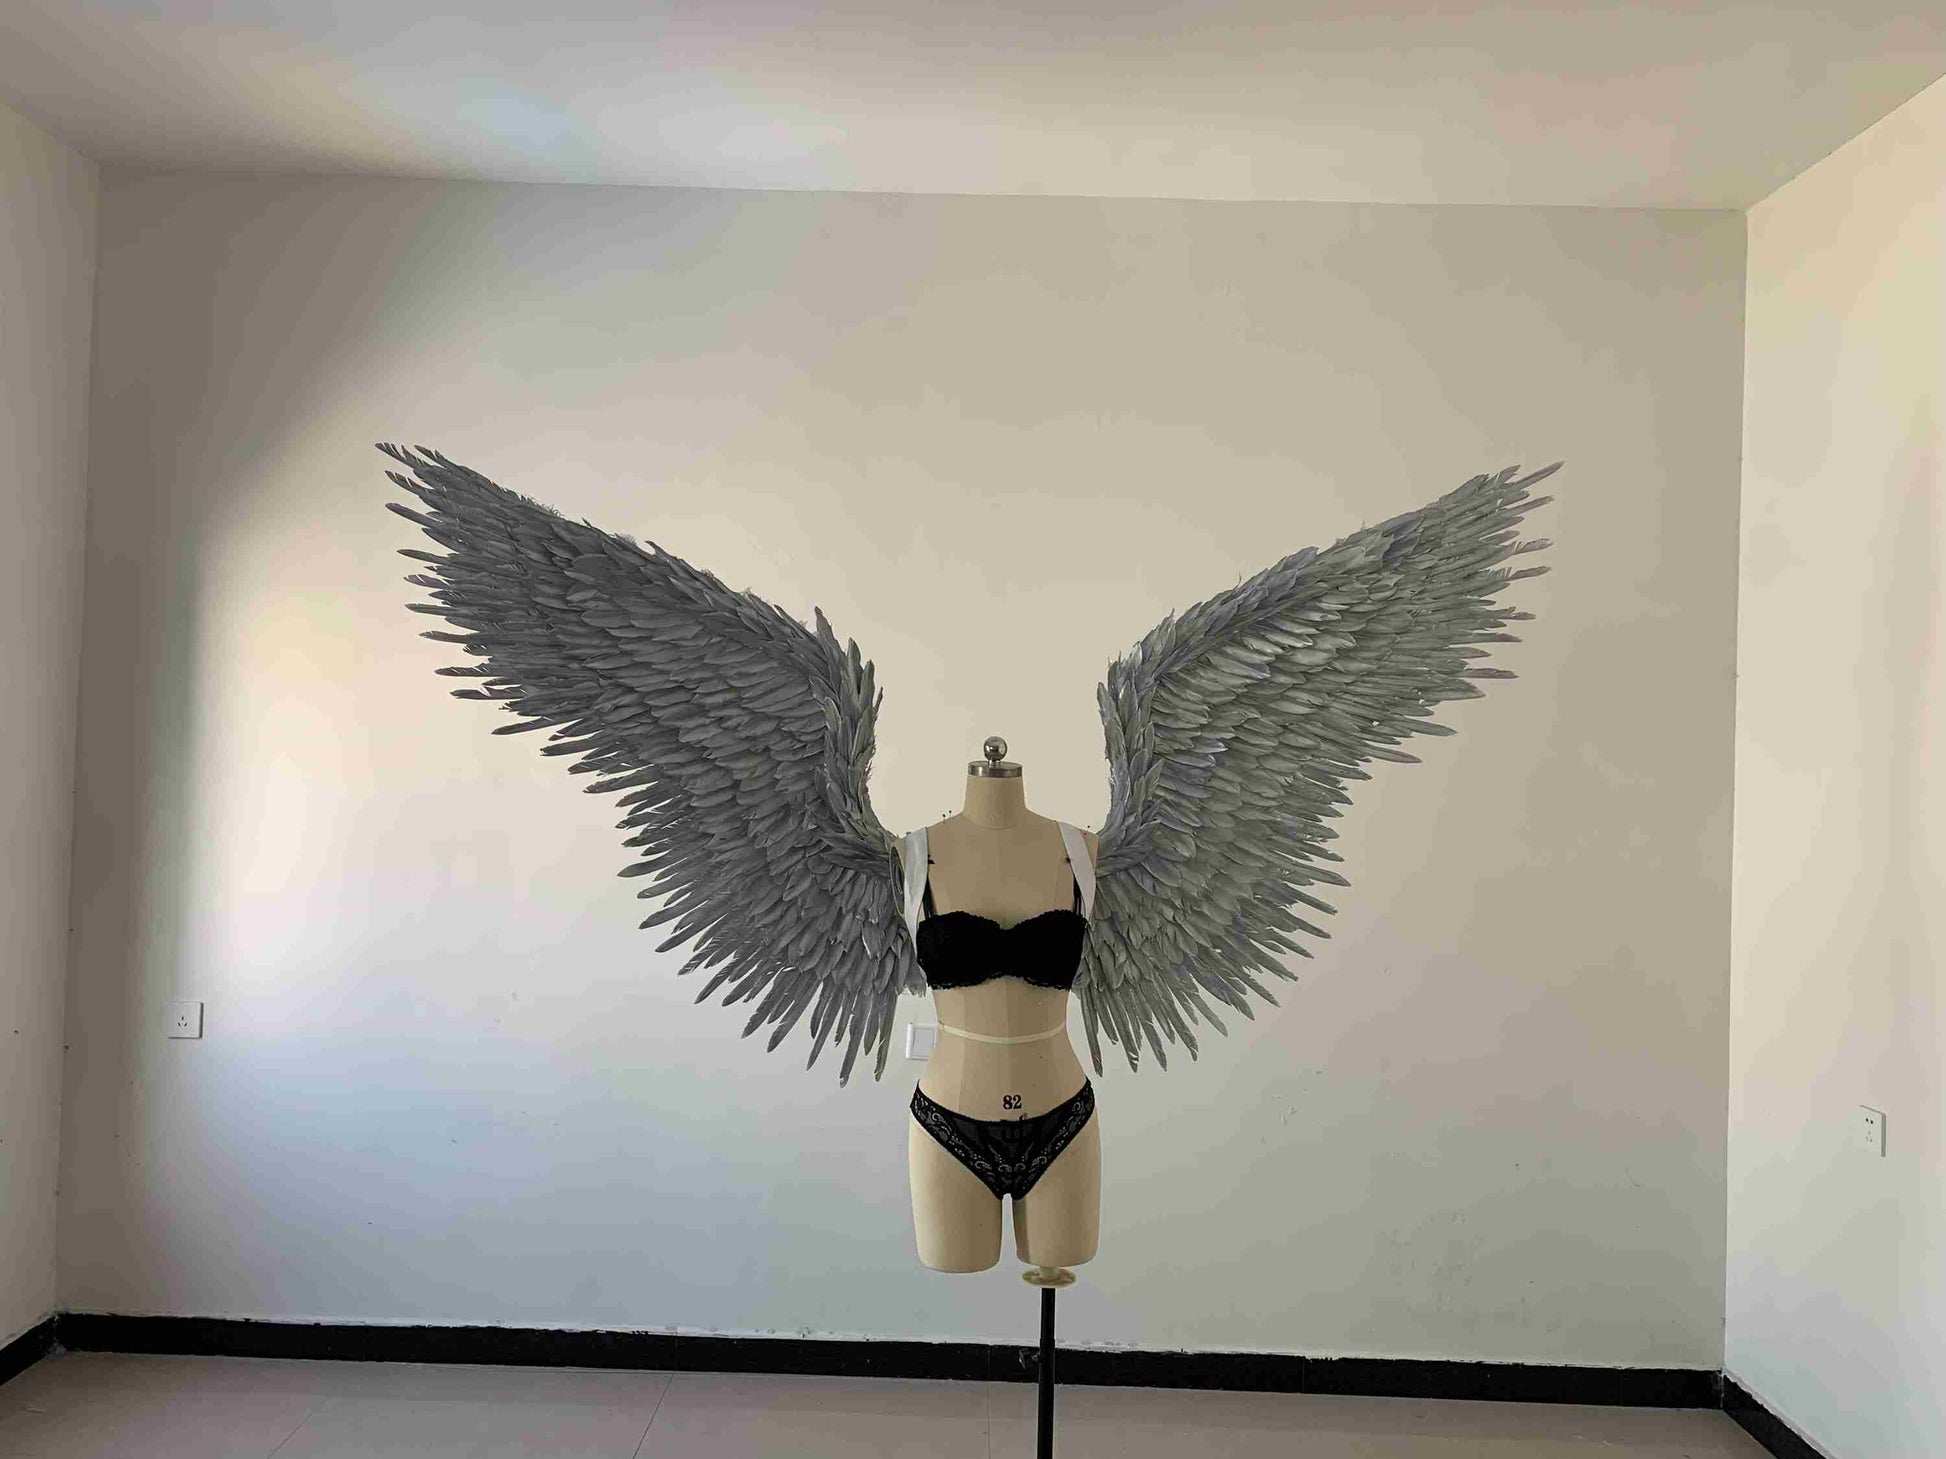 Our silver color angel wings from the front. Made from goose feathers. Wings for angel costume or devil costume. Suitable for photoshoots.